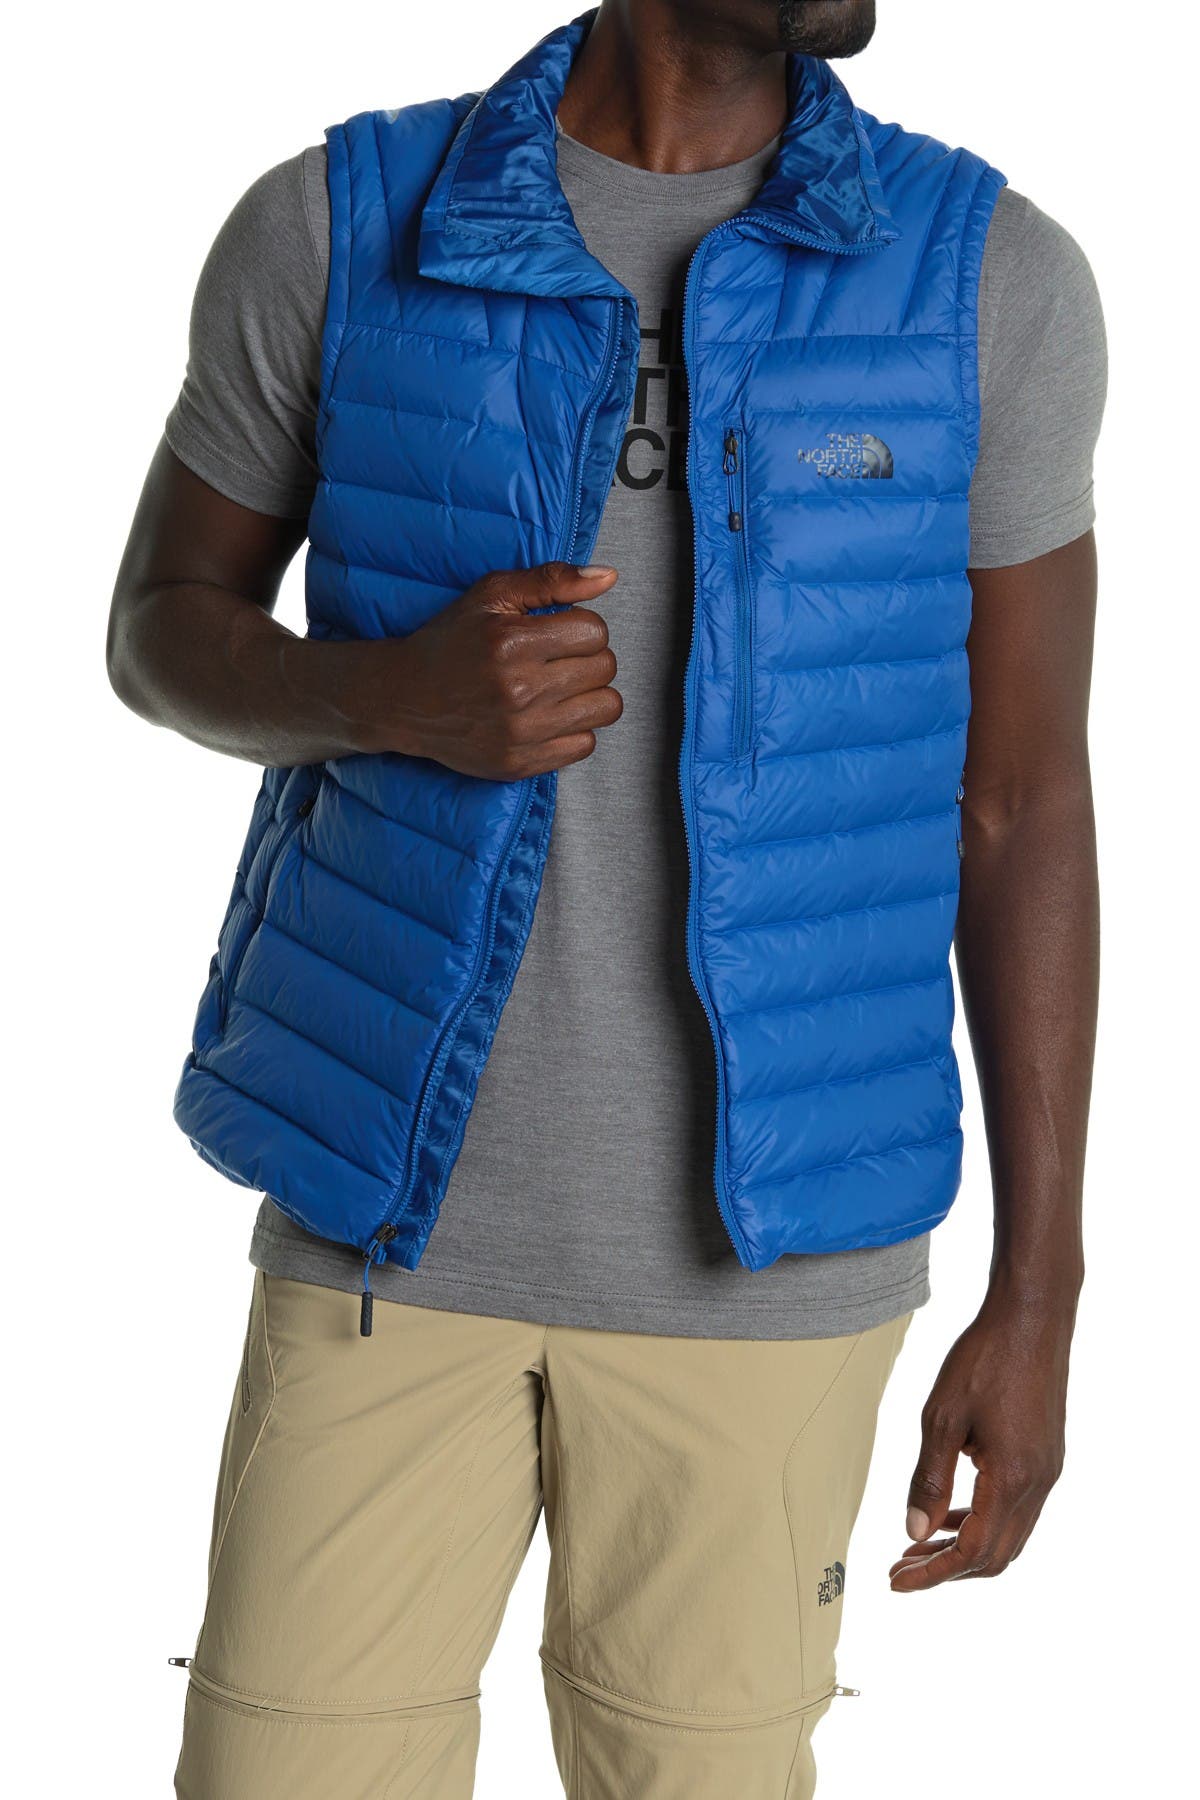 north face mens puffer vest